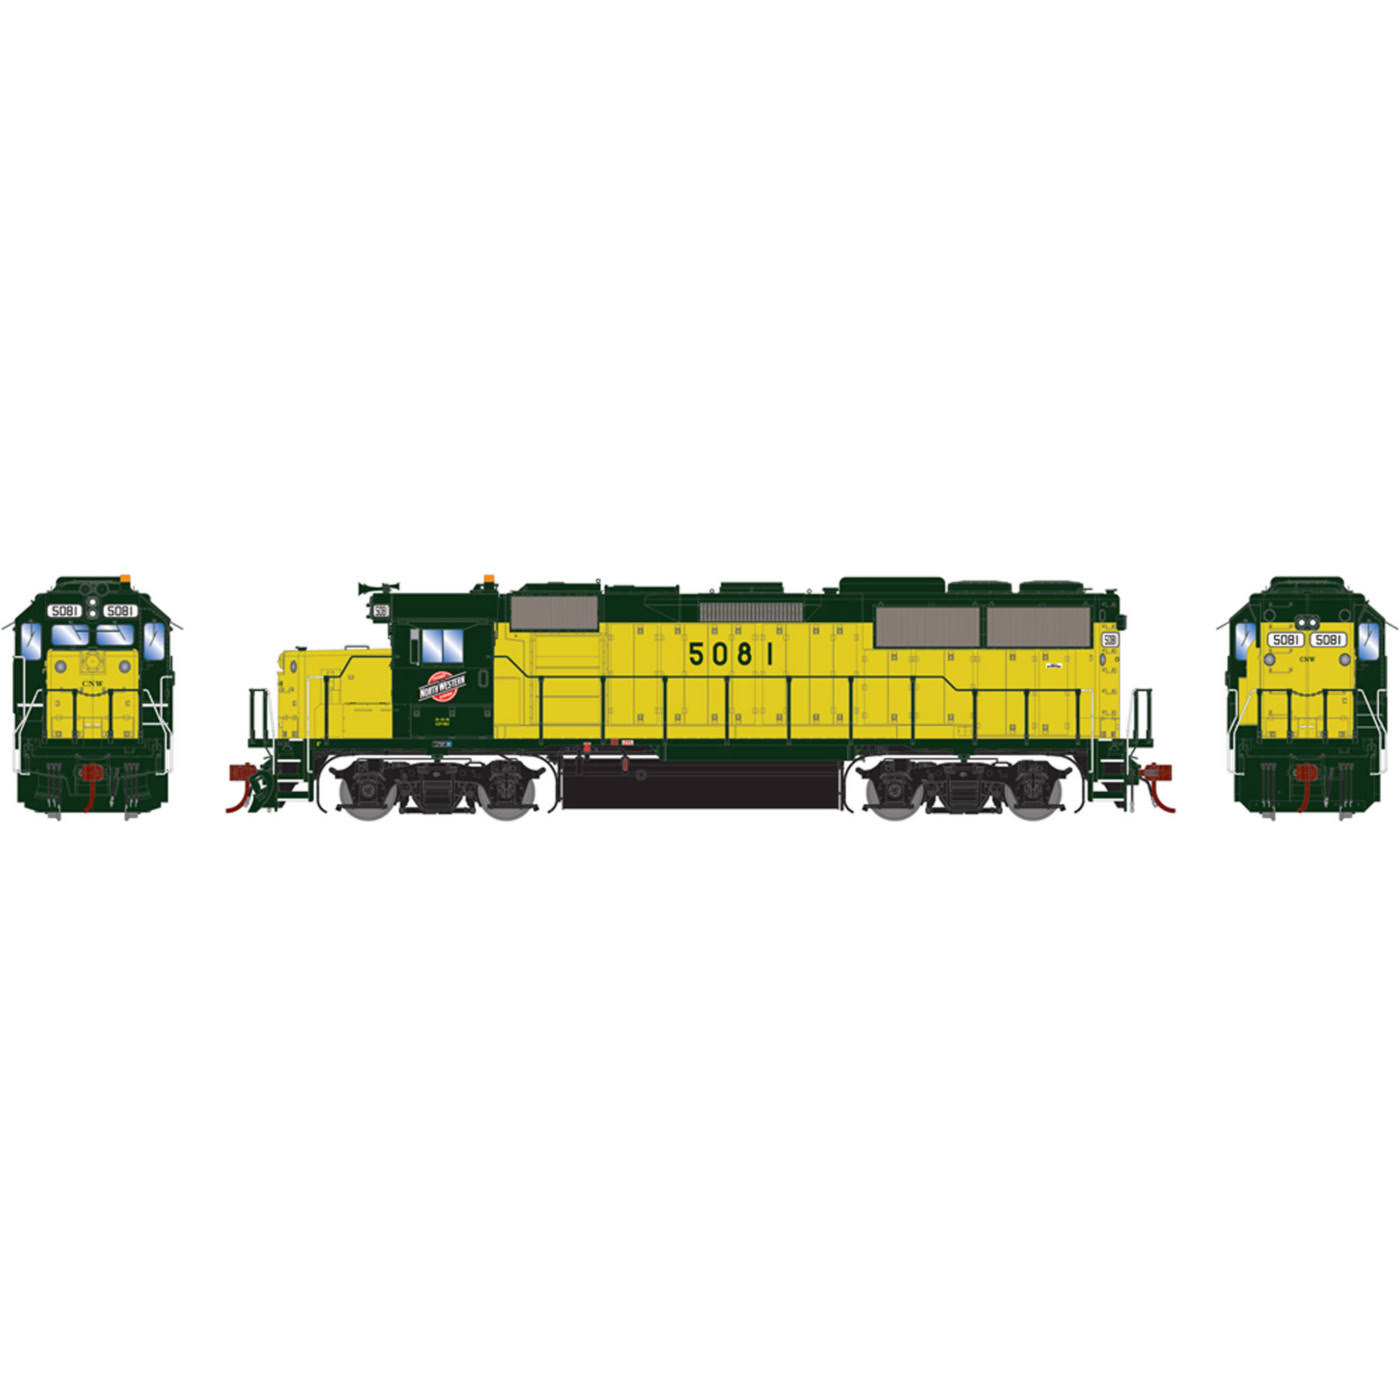 Athearn Ho GP50 C & NW #5081, Athg65688 | Athearn | General | 30 Day Money Back Guarantee | Free Shipping On All Orders | Delivery Guaranteed